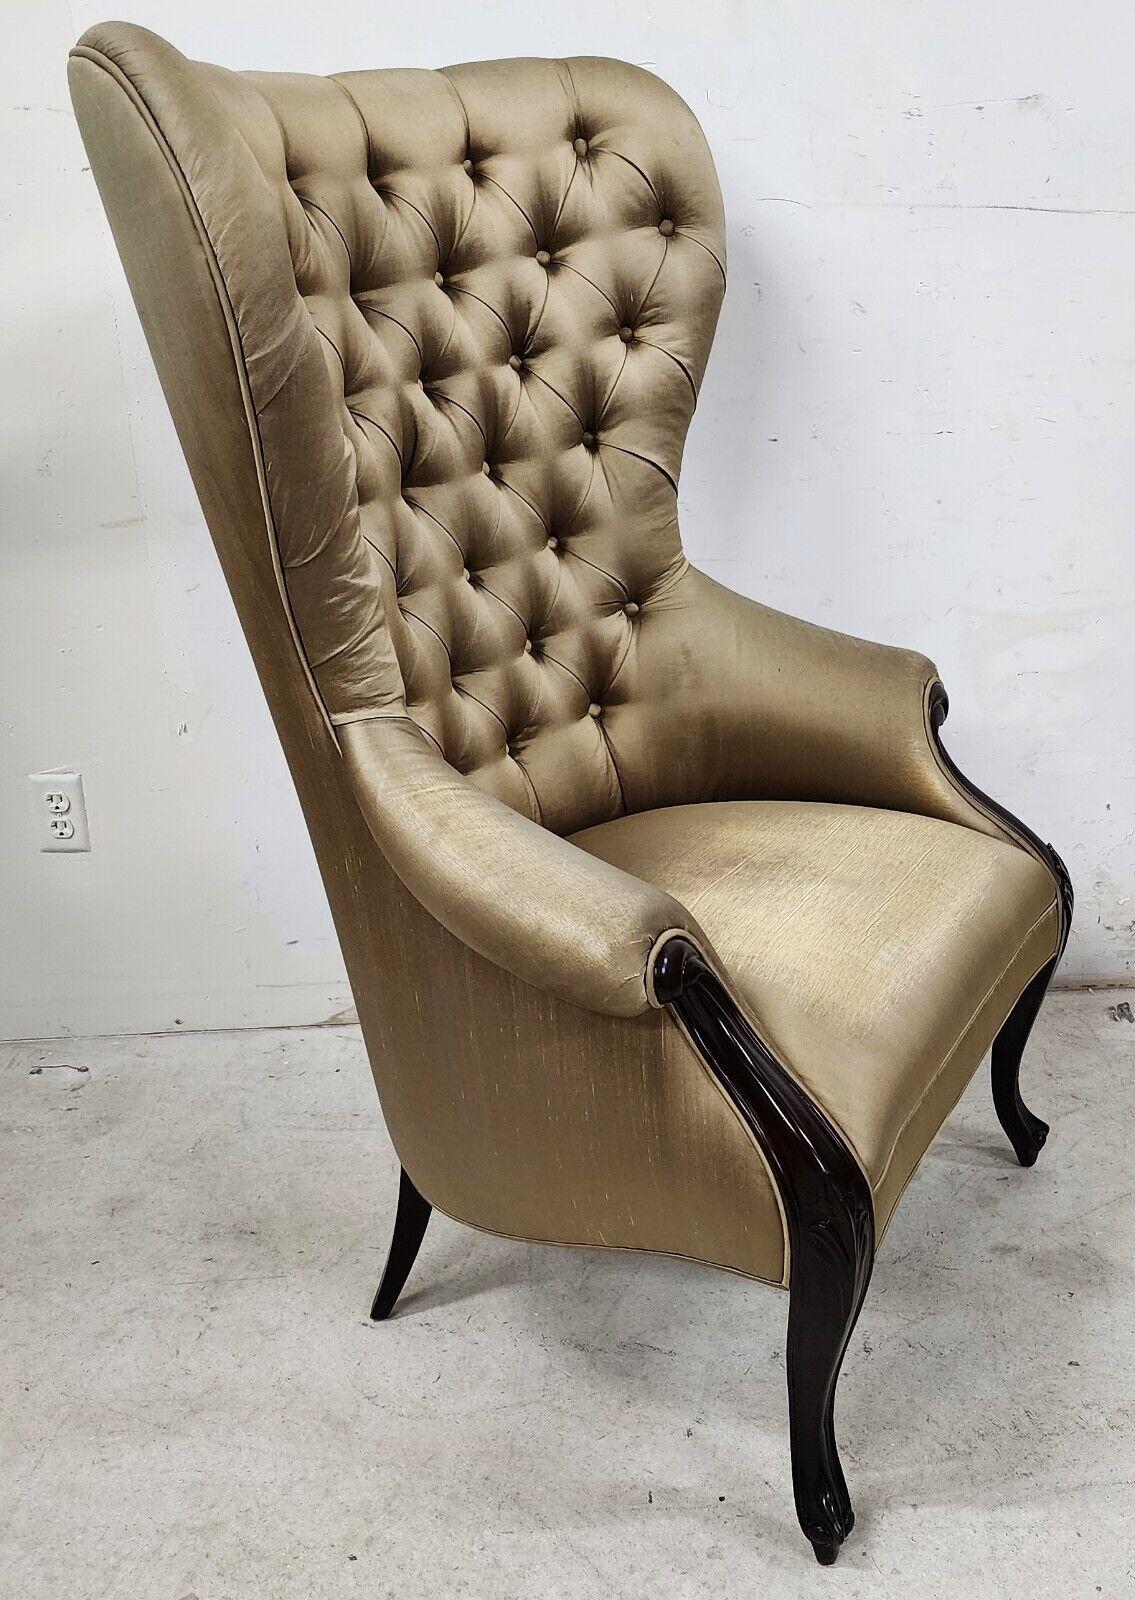 For FULL item description click on CONTINUE READING at the bottom of this page.


Offering One Of Our Recent Palm Beach Estate Fine Furniture Acquisitions Of A
French Wingback Armchair By Christopher Guy

Approximate Measurements in